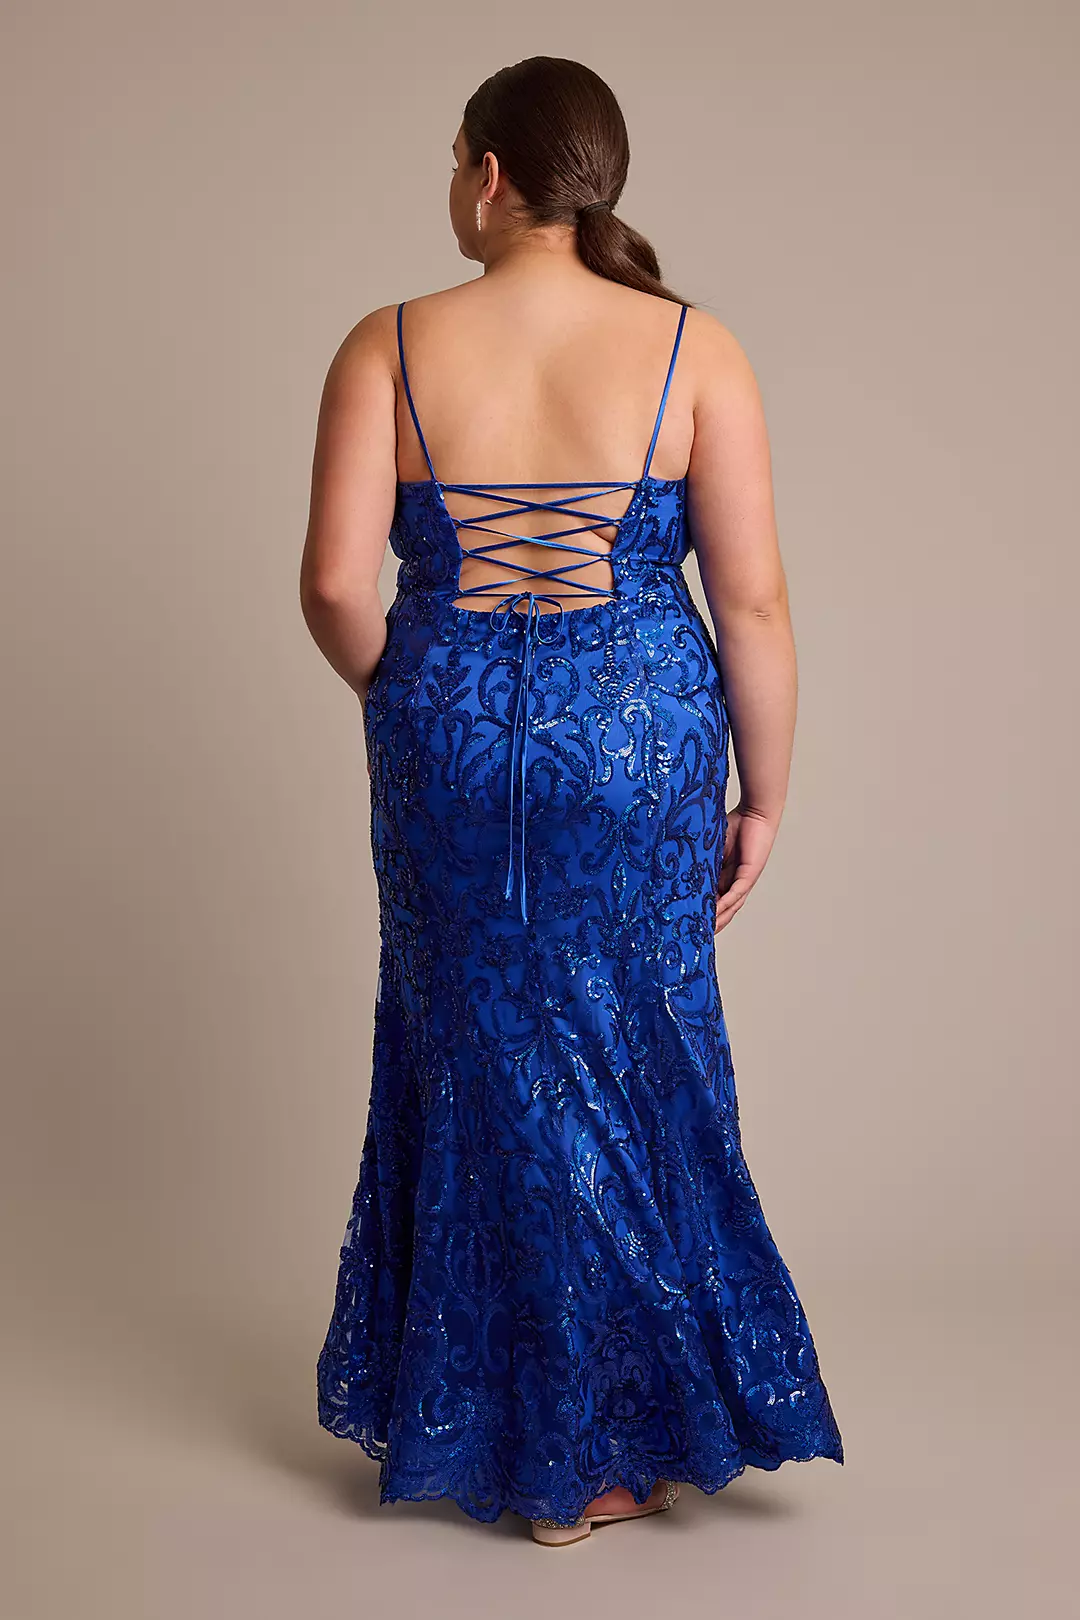 Patterned Sequin Mermaid Dress with Lace-Up Back Image 2